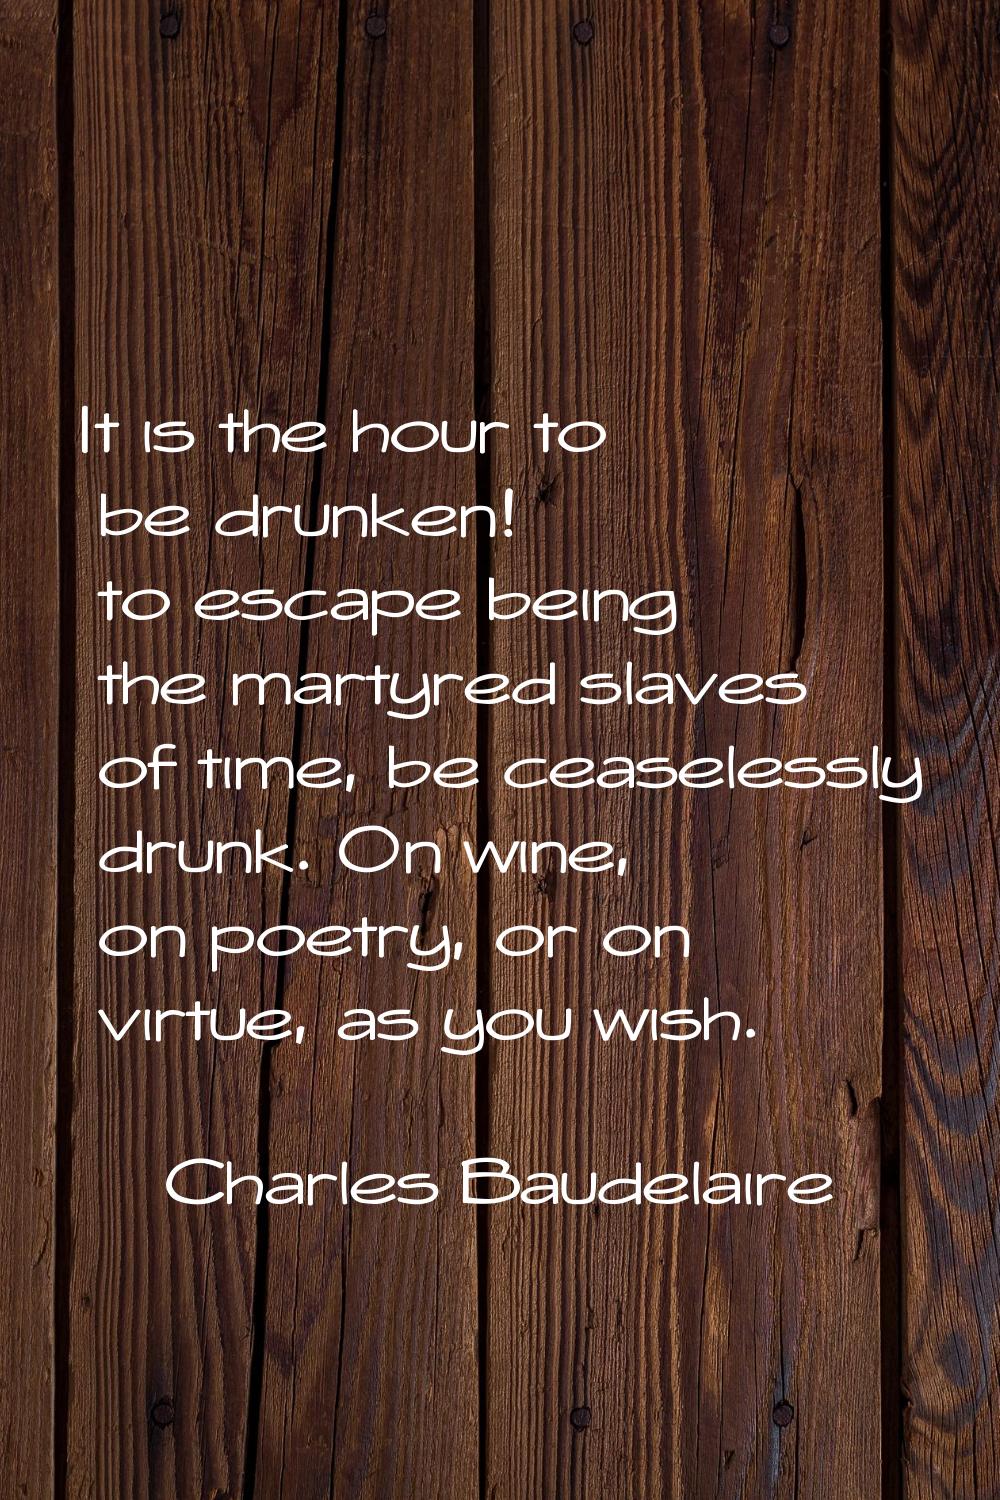 It is the hour to be drunken! to escape being the martyred slaves of time, be ceaselessly drunk. On